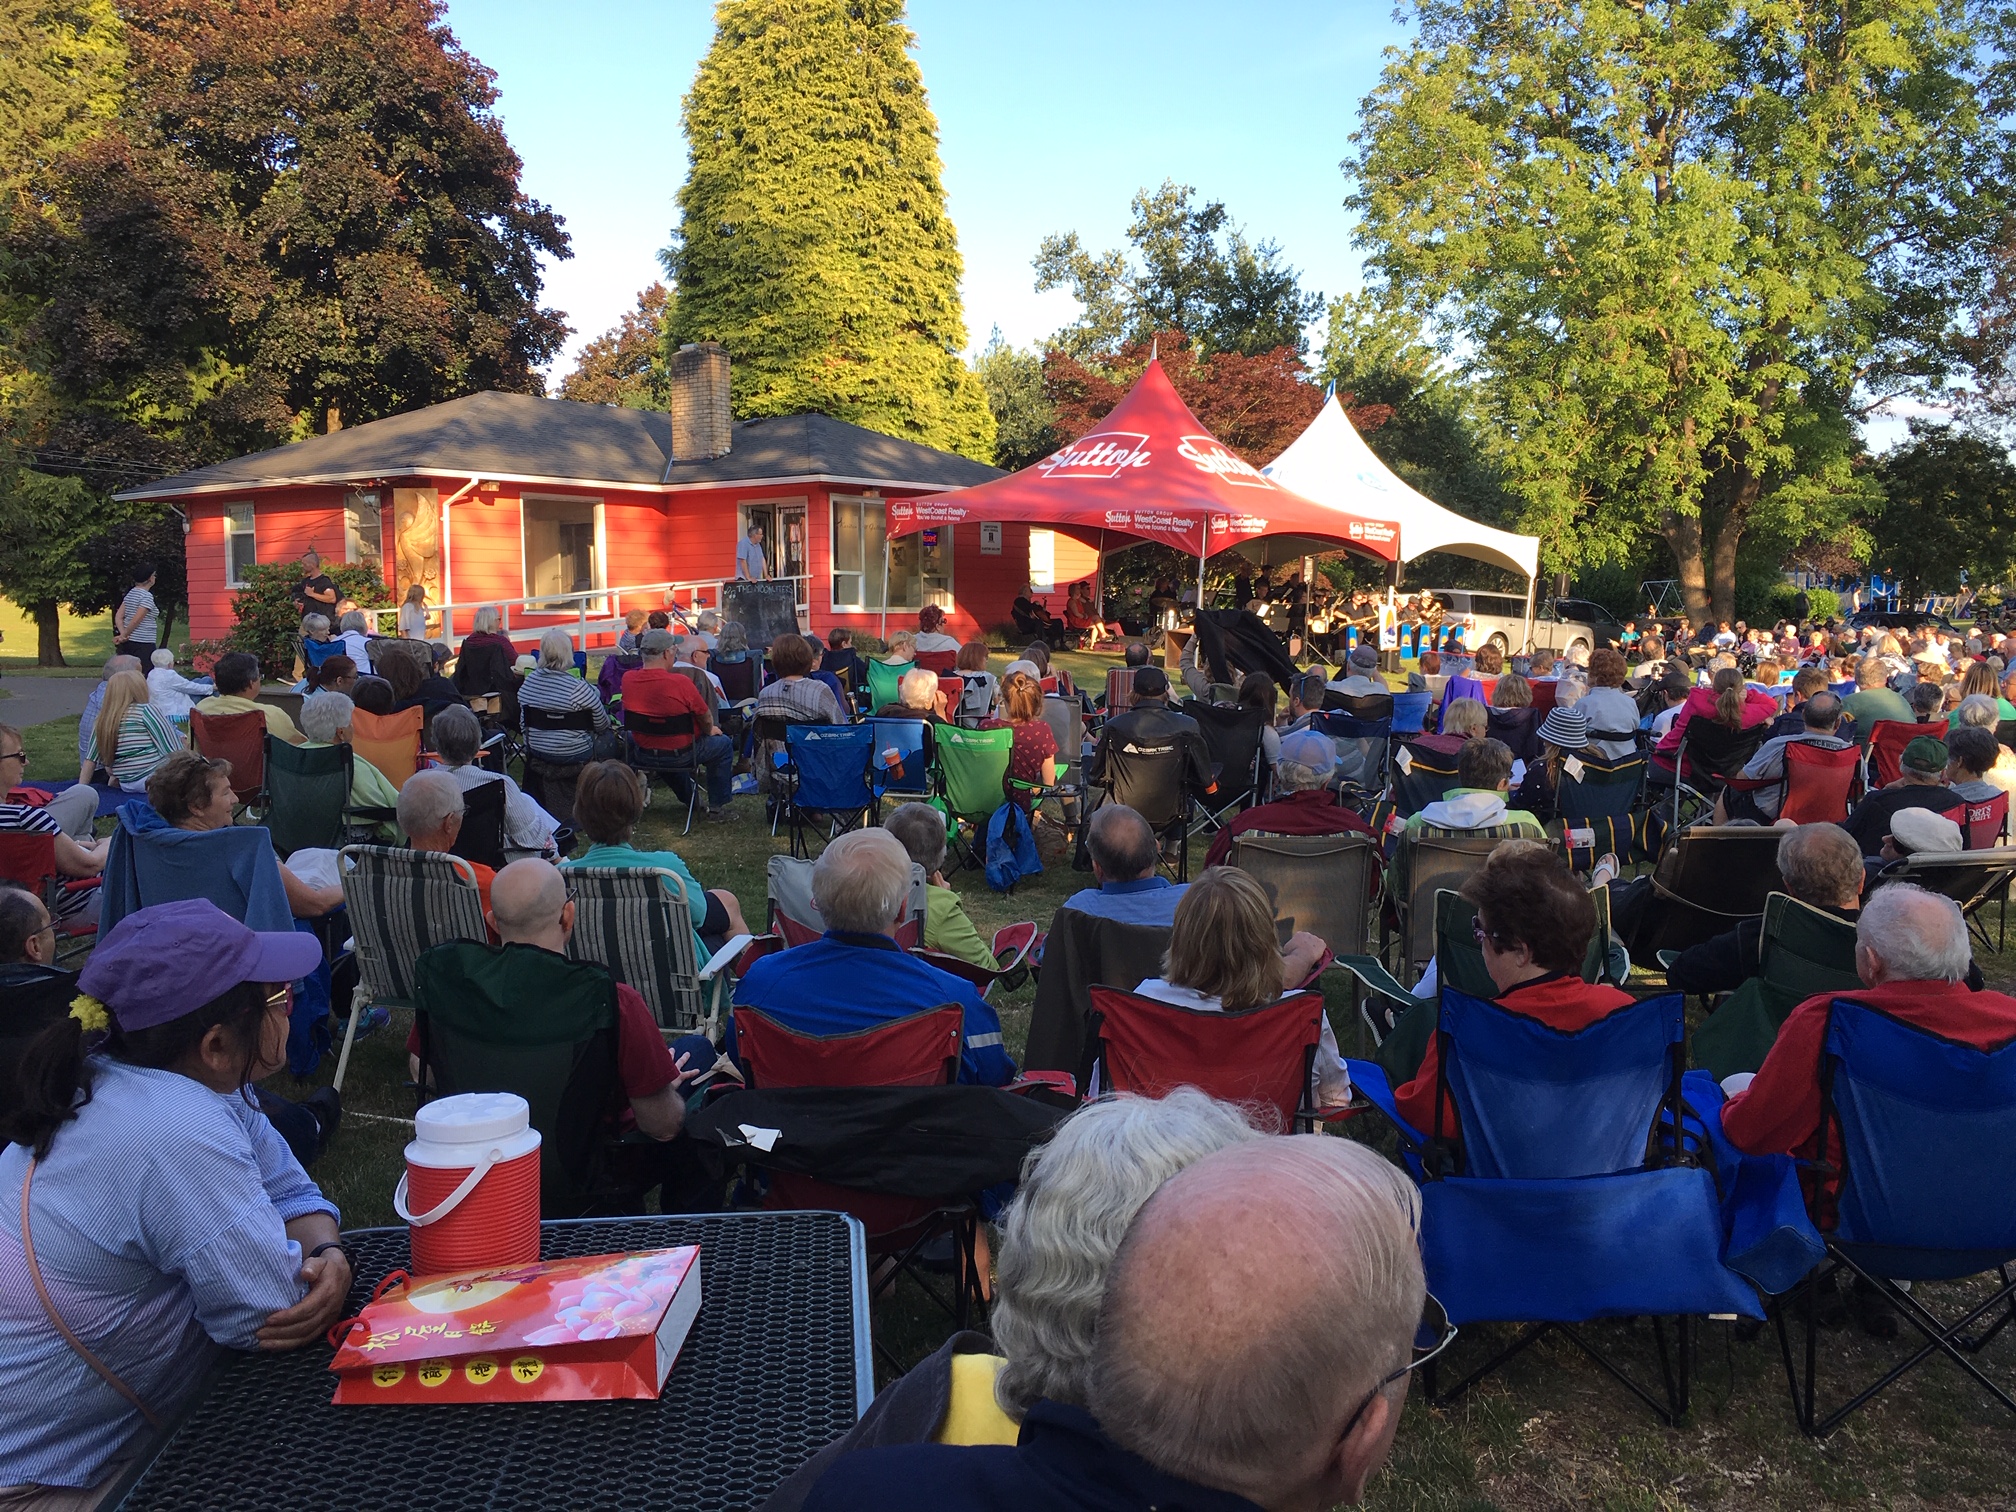 The Abbotsford Arts Council presents its summer Mill Lake Concert Series